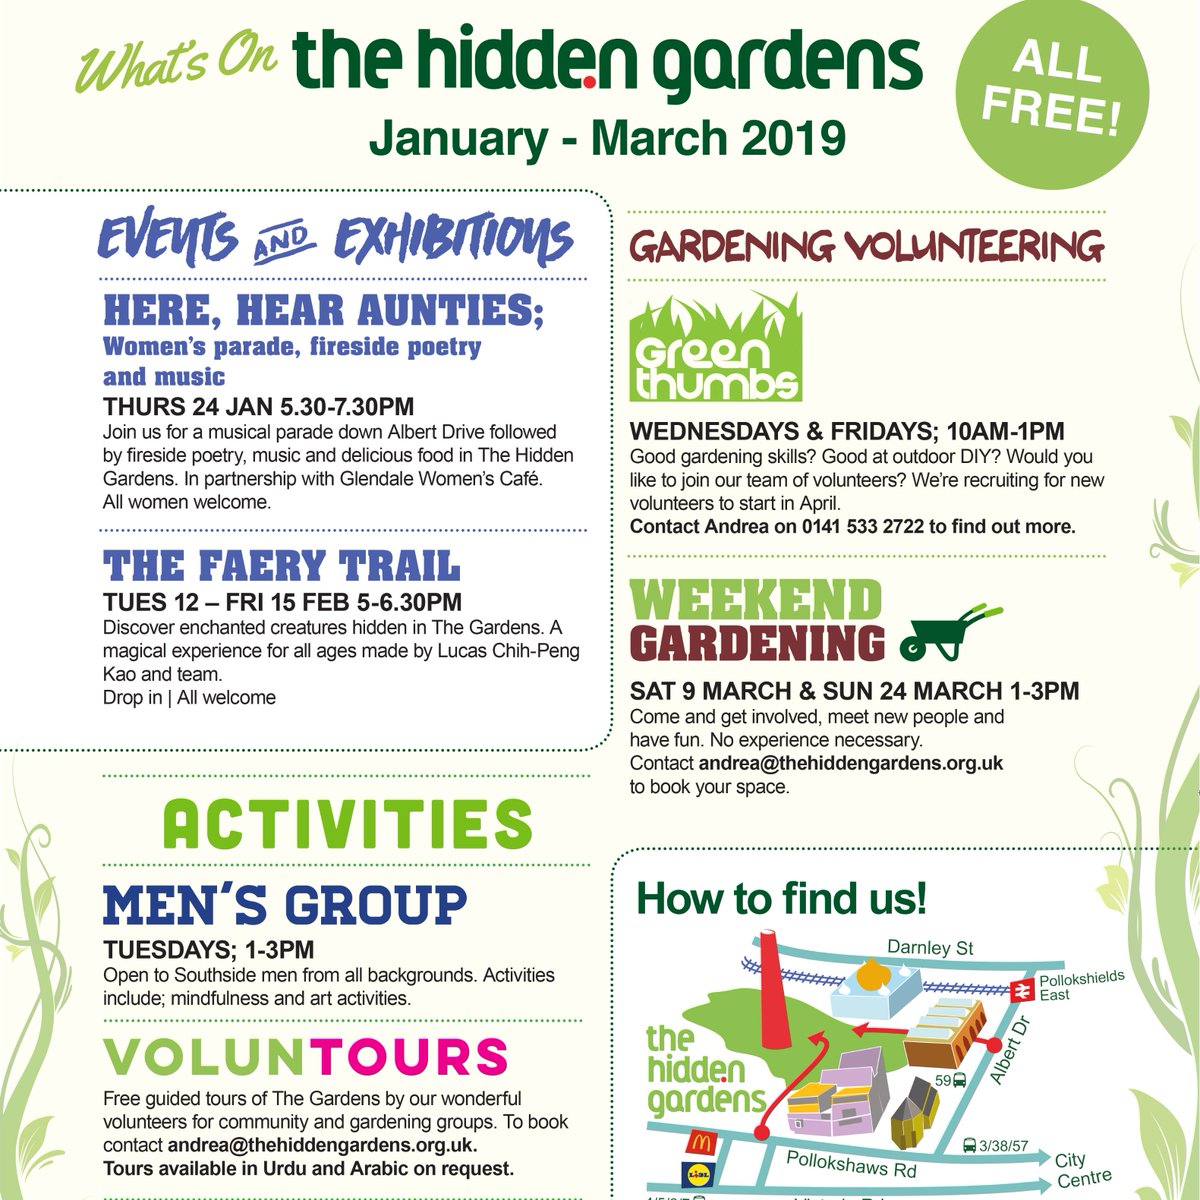 Our January- March What's On is out! With plenty of events and activities for these winter months 😀
#thehiddengardensglasgow #community #glasgowevents #volunteers